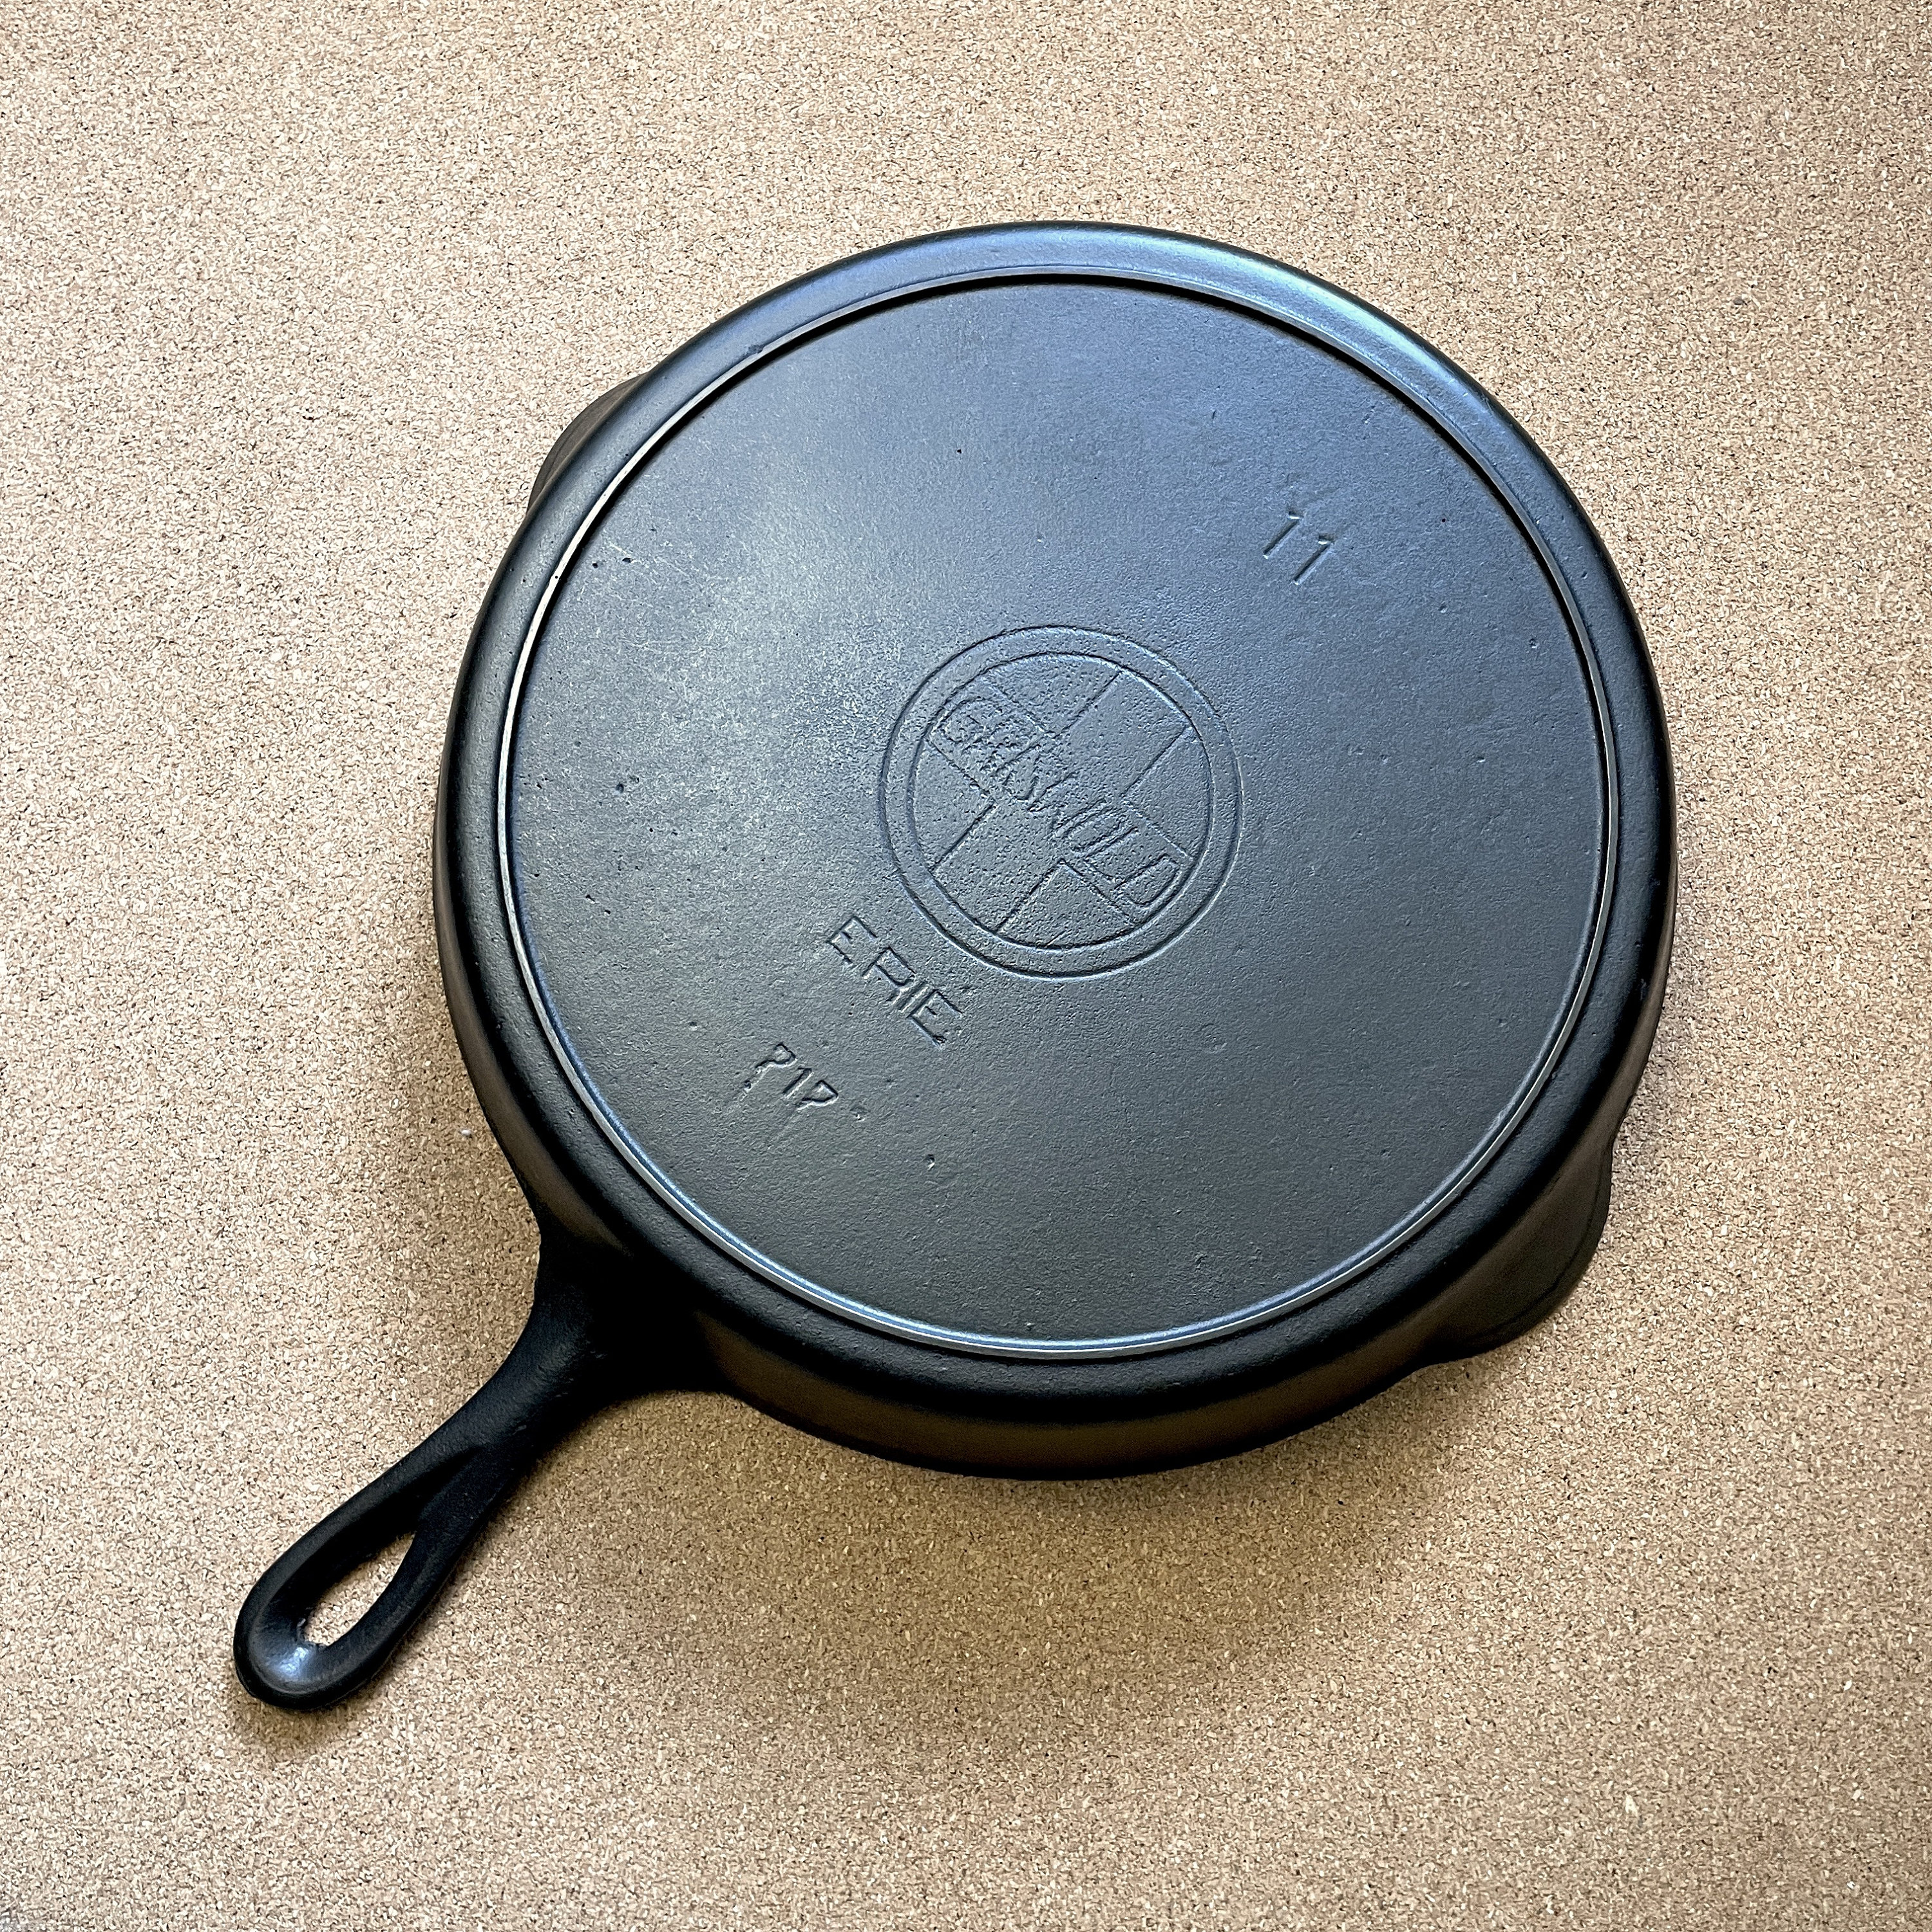 Excellent 9 Griswold Cast Iron Skillet With Strong Heat Ring Slant Erie  Logo No Quotes Sits Flat Glass Smooth 710B Ready to Use or Display 